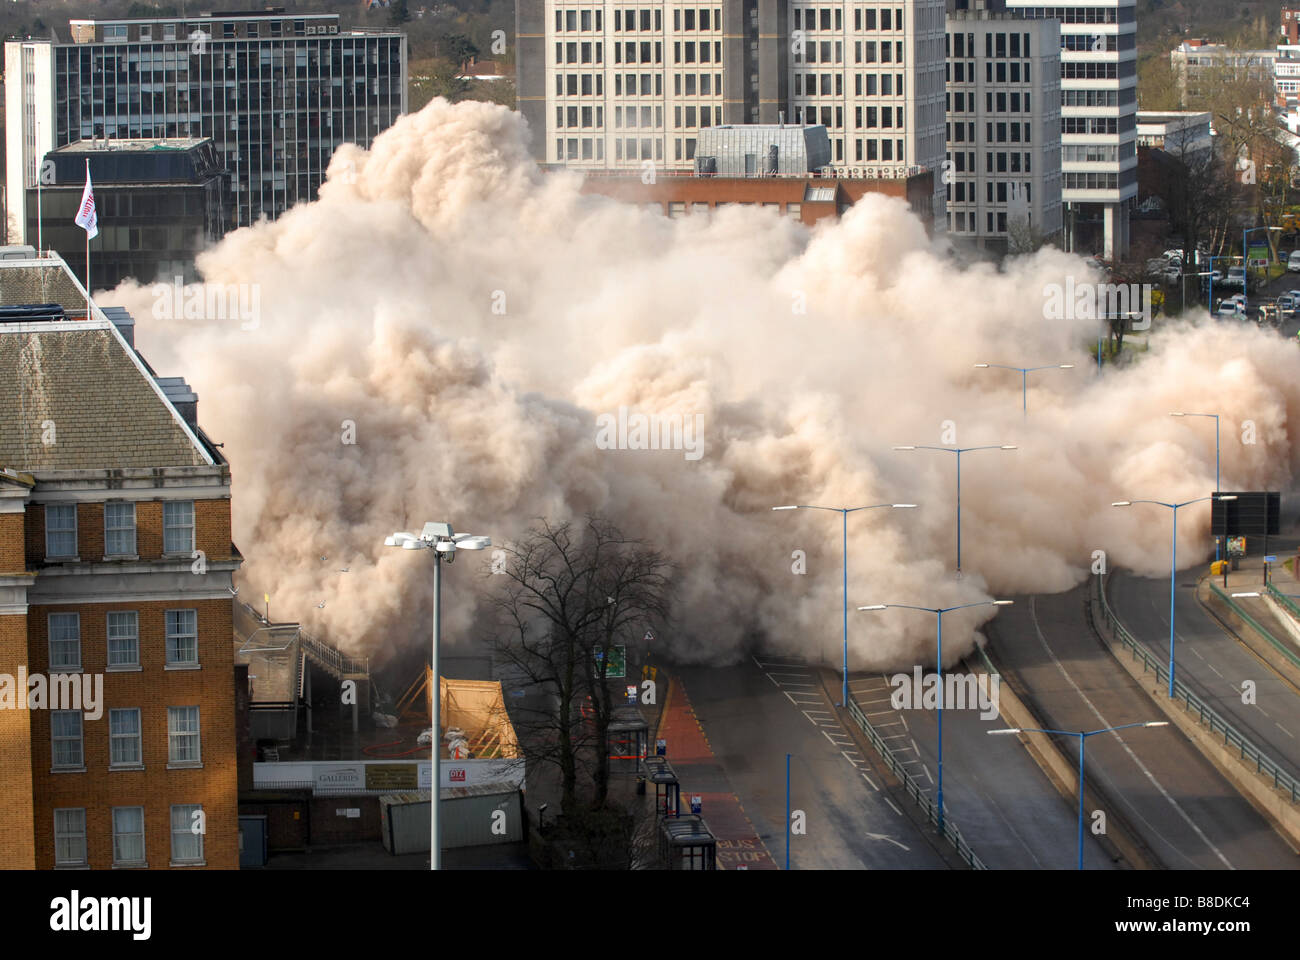 Dust cloud at Fiveways Birmingham after Edgbaston Shopping Centre is demolished by explosives uk Stock Photo